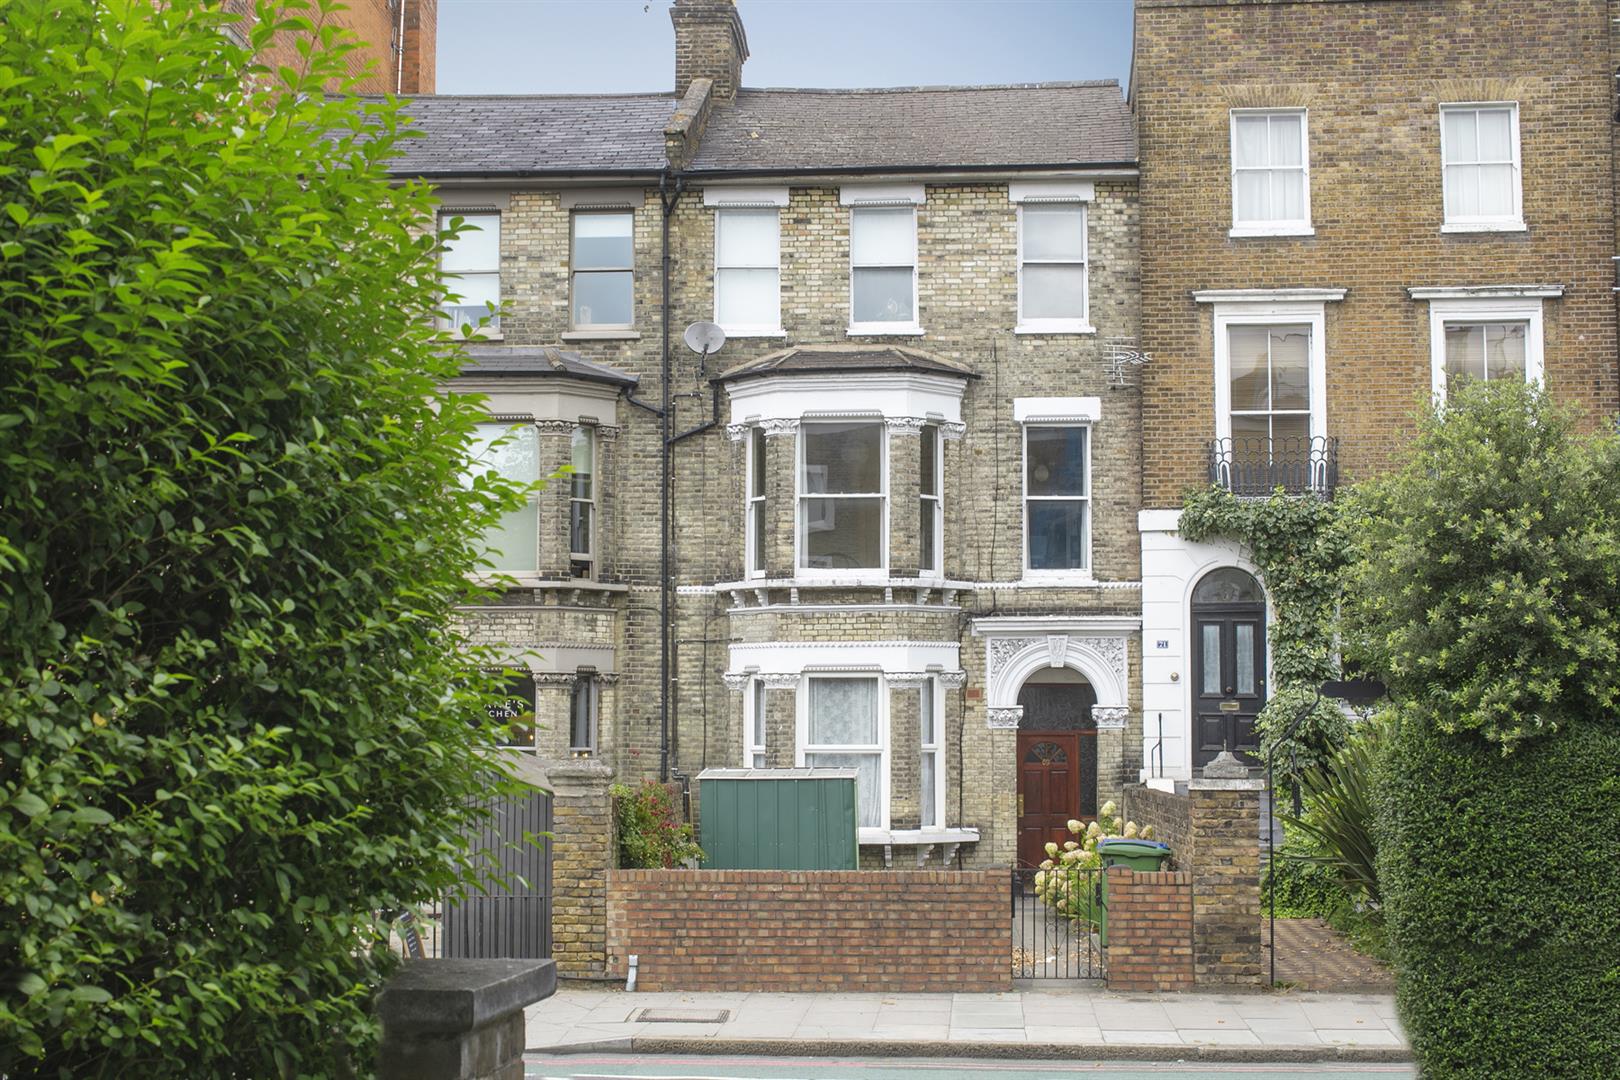 Flat - Conversion For Sale in Peckham Road, Camberwell, SE5 859 view1